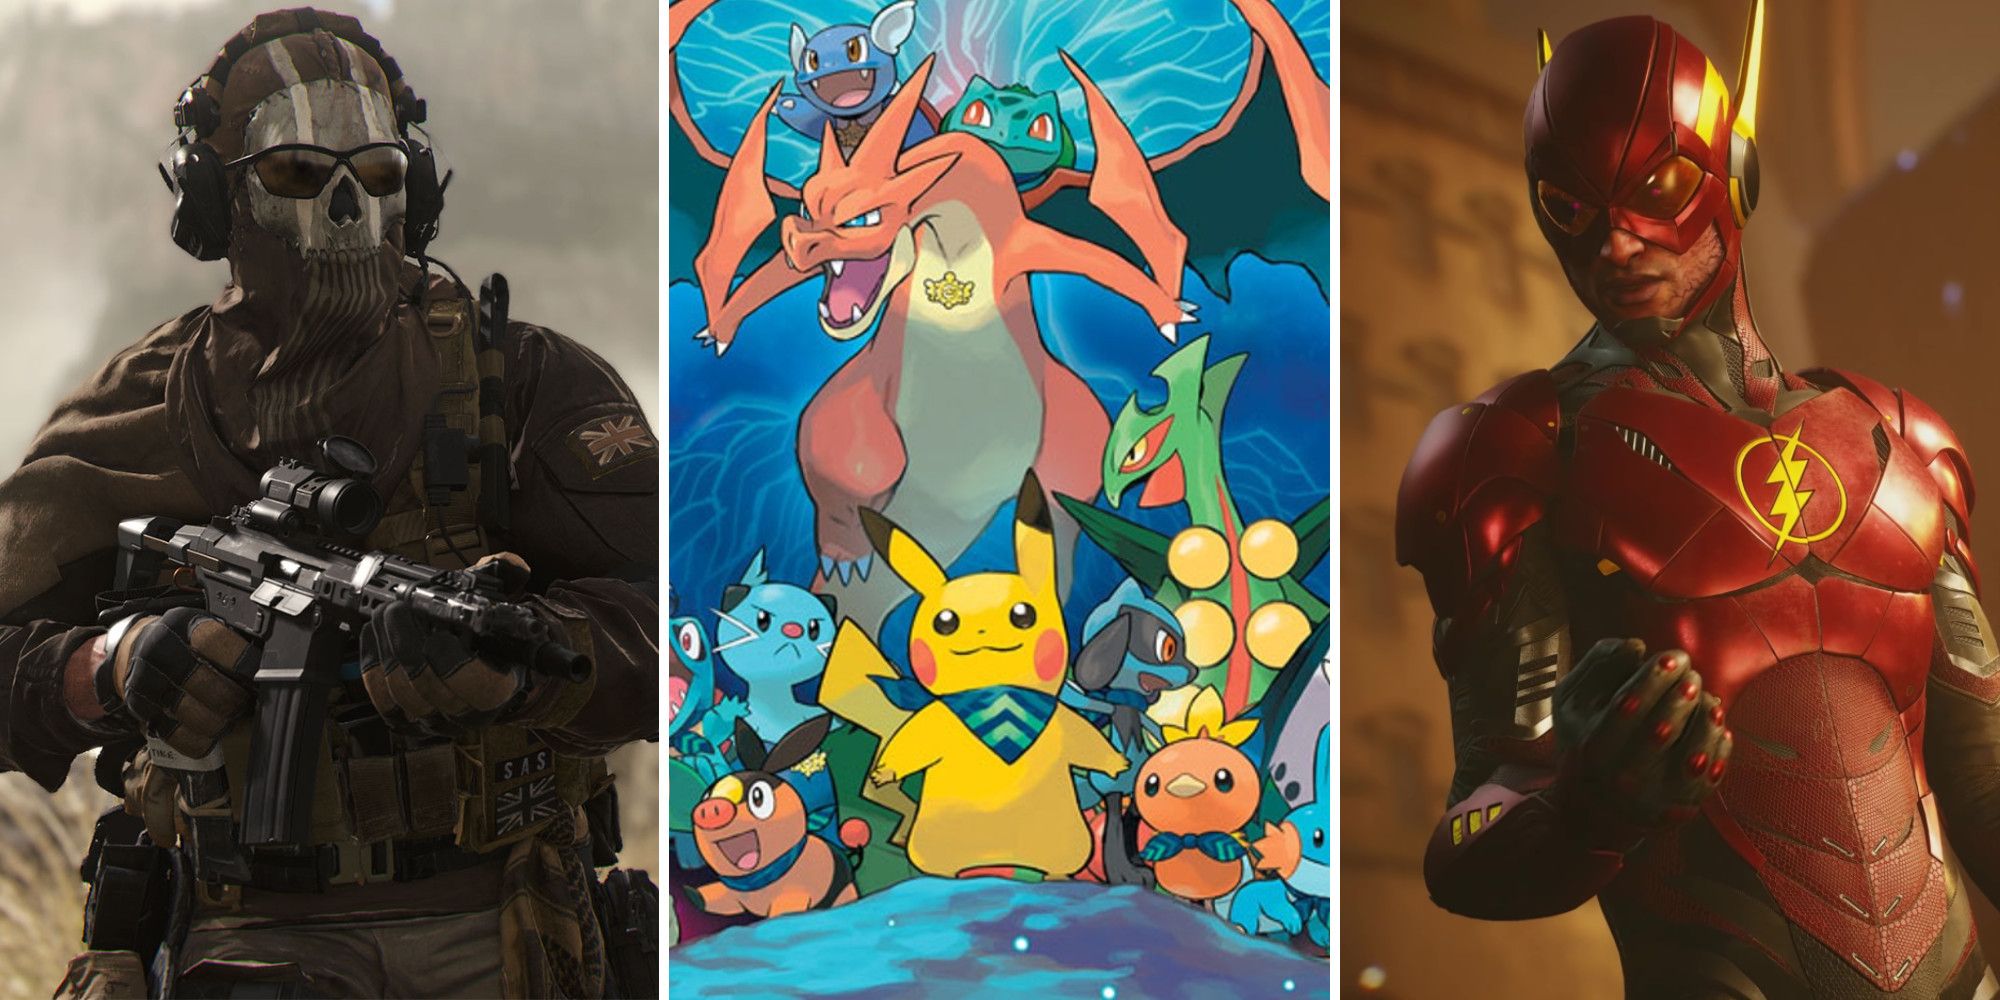 Ghost from Modern Warfare 2, a bunch of Pokemon, and The Flash